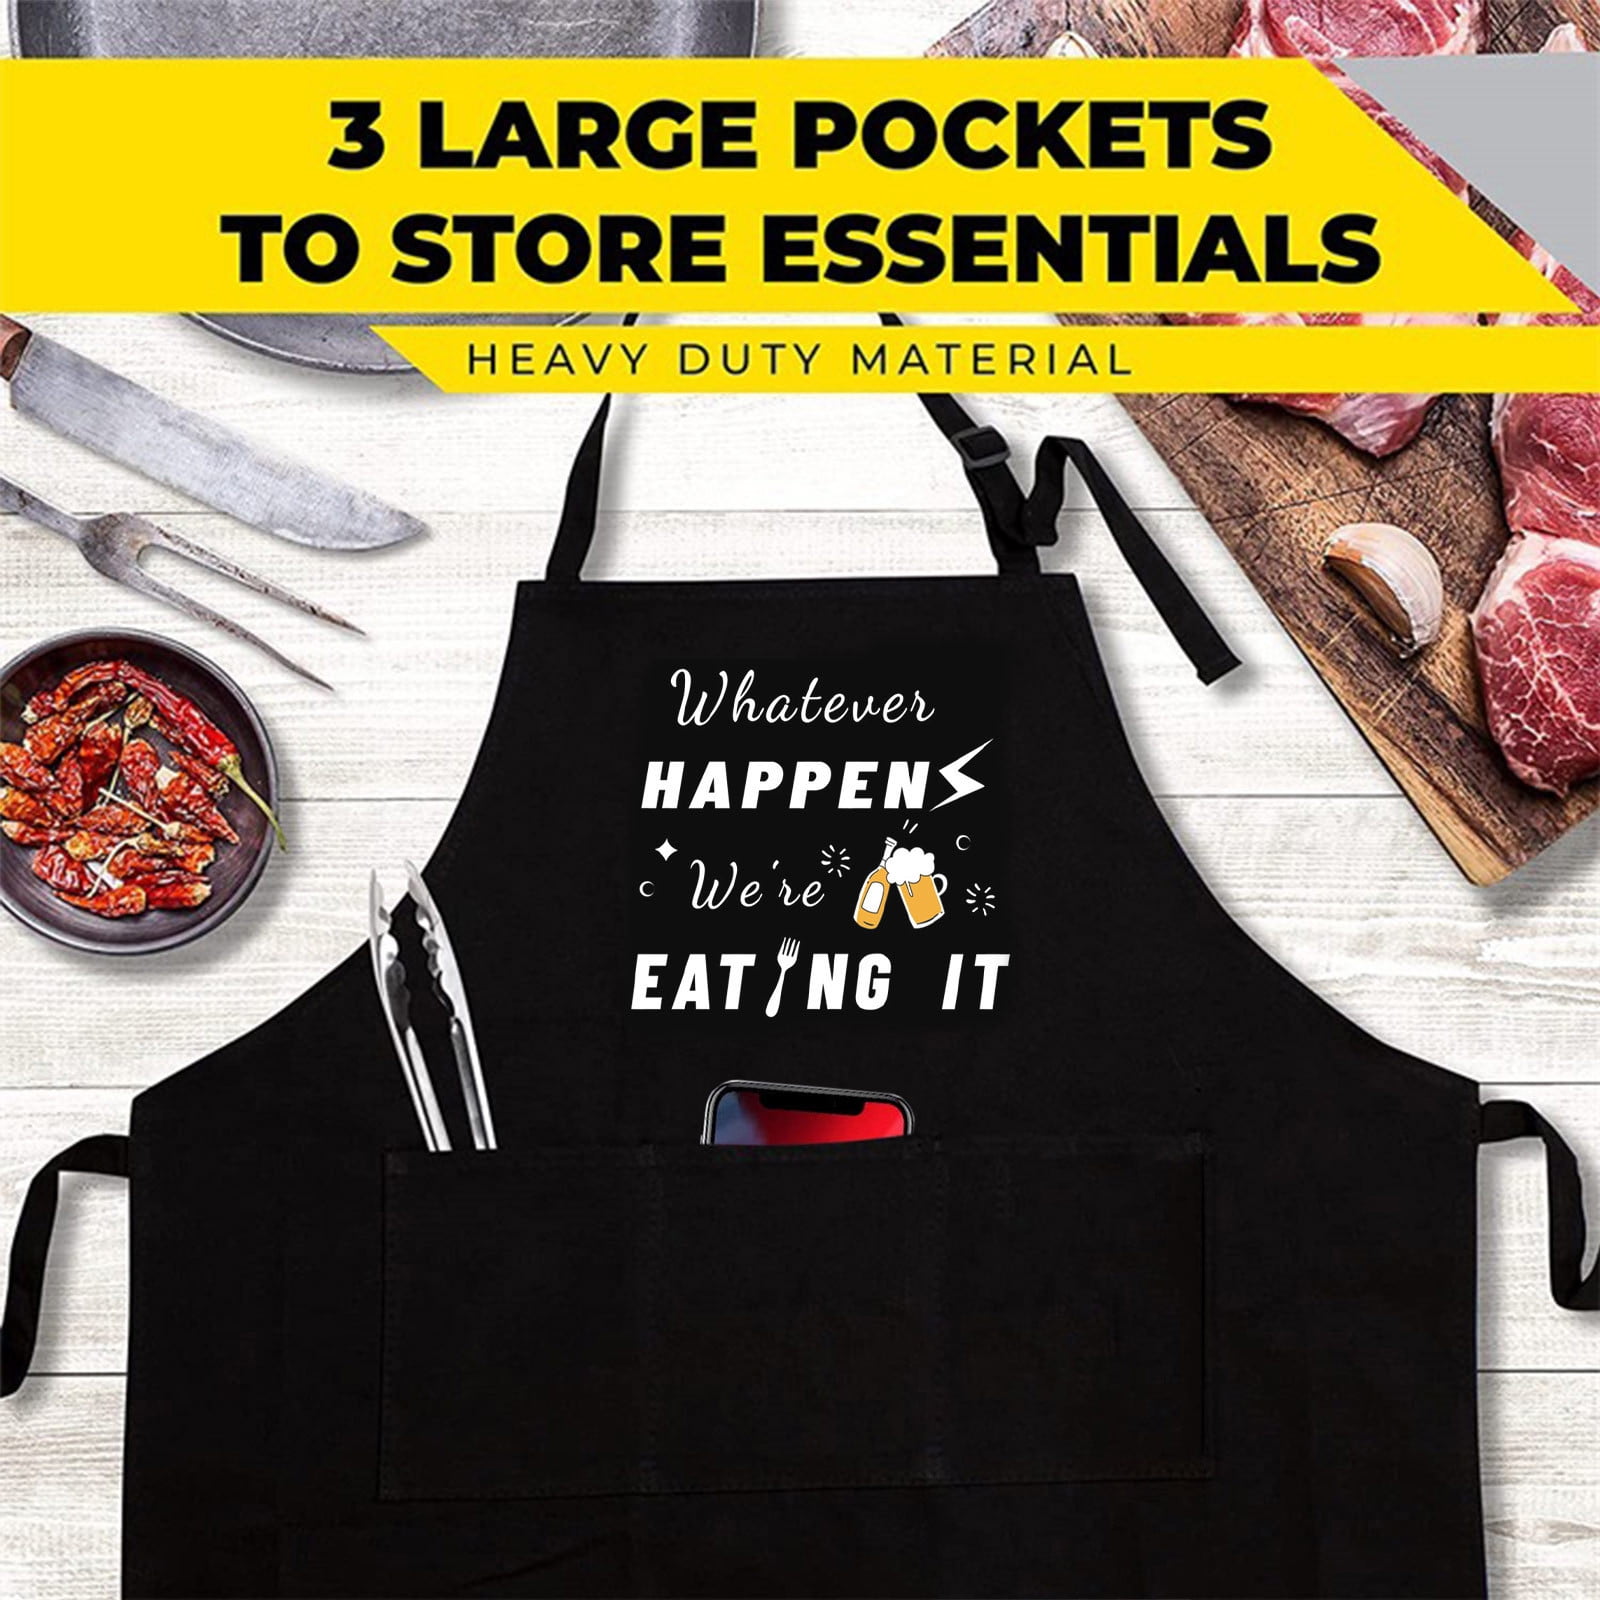 FORTIVO Cooking Aprons For Men, Grill Apron Men, Apron For Men, Apron With  Pockets, Cooking Gifts For Men, Kitchen Aprons For Men, Chef Aprons For